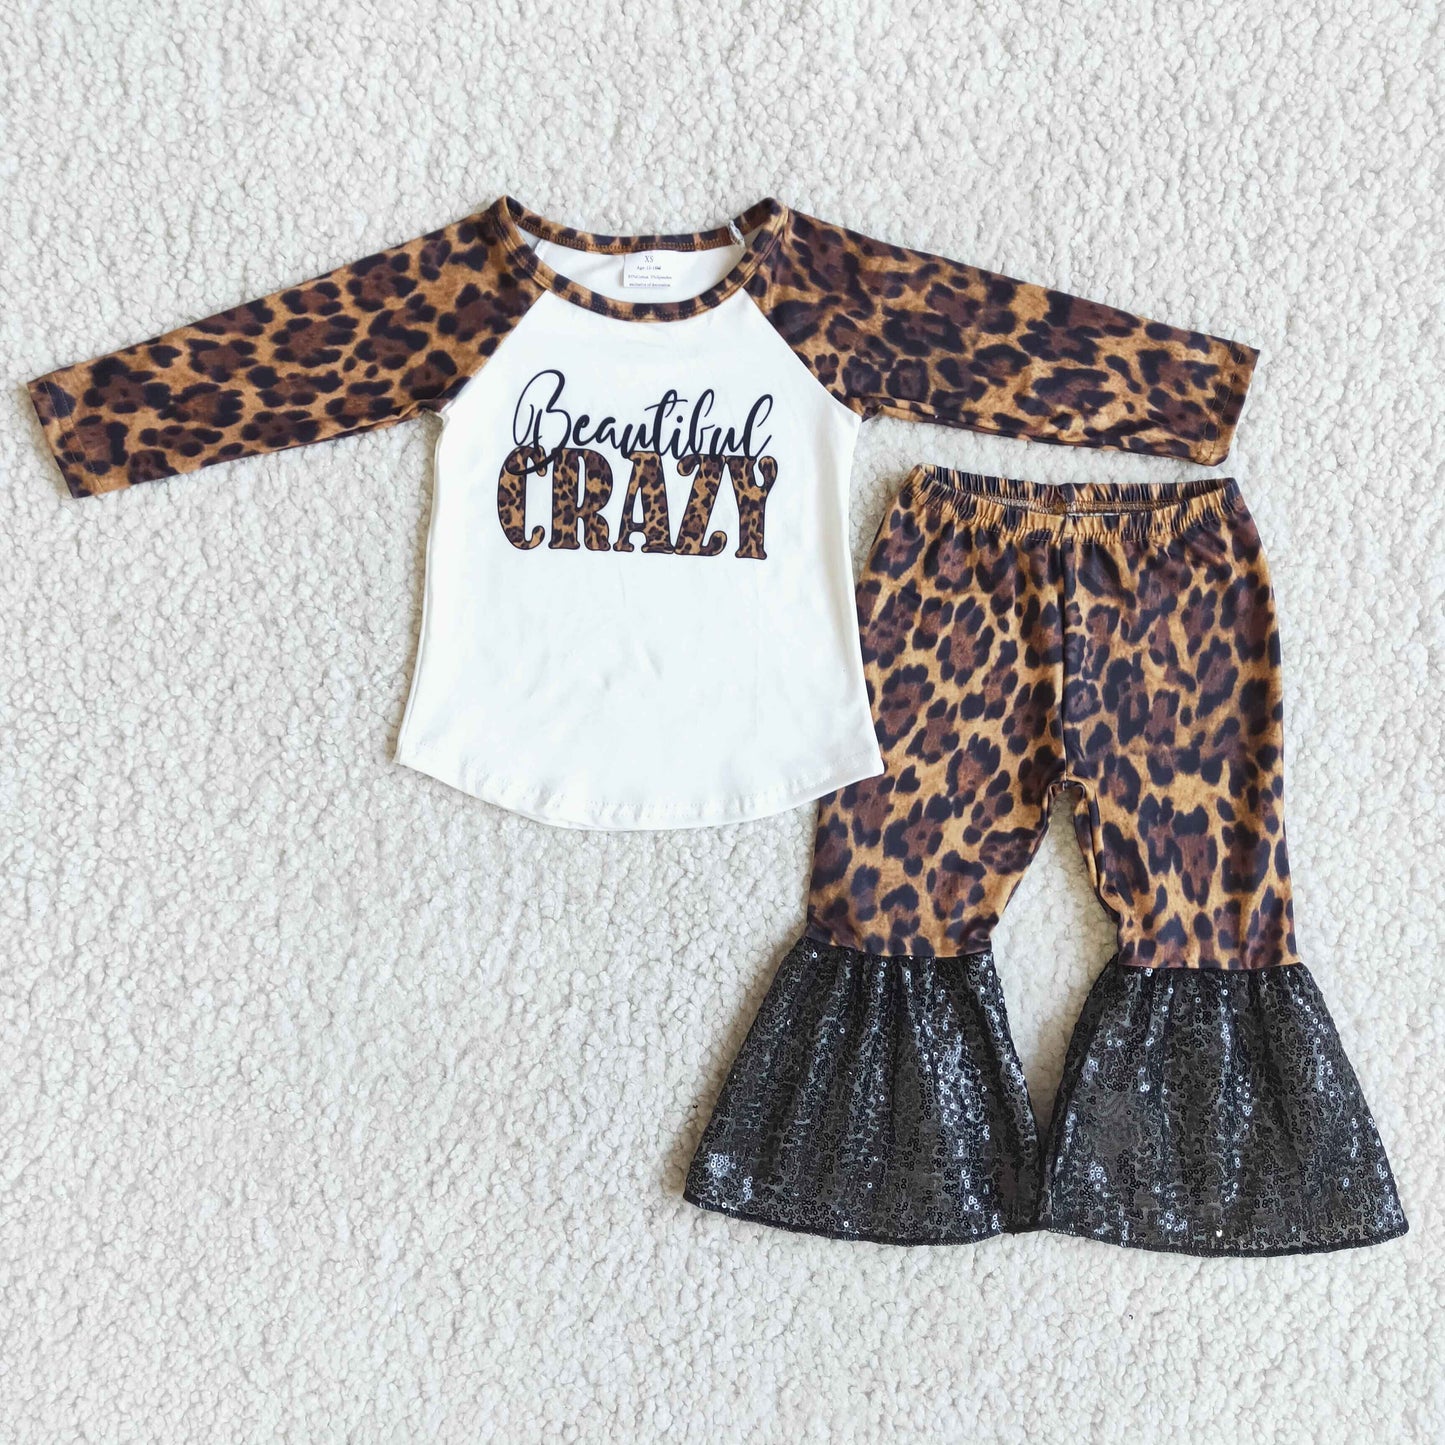 Beautiful crazy leopard spring fall outfit